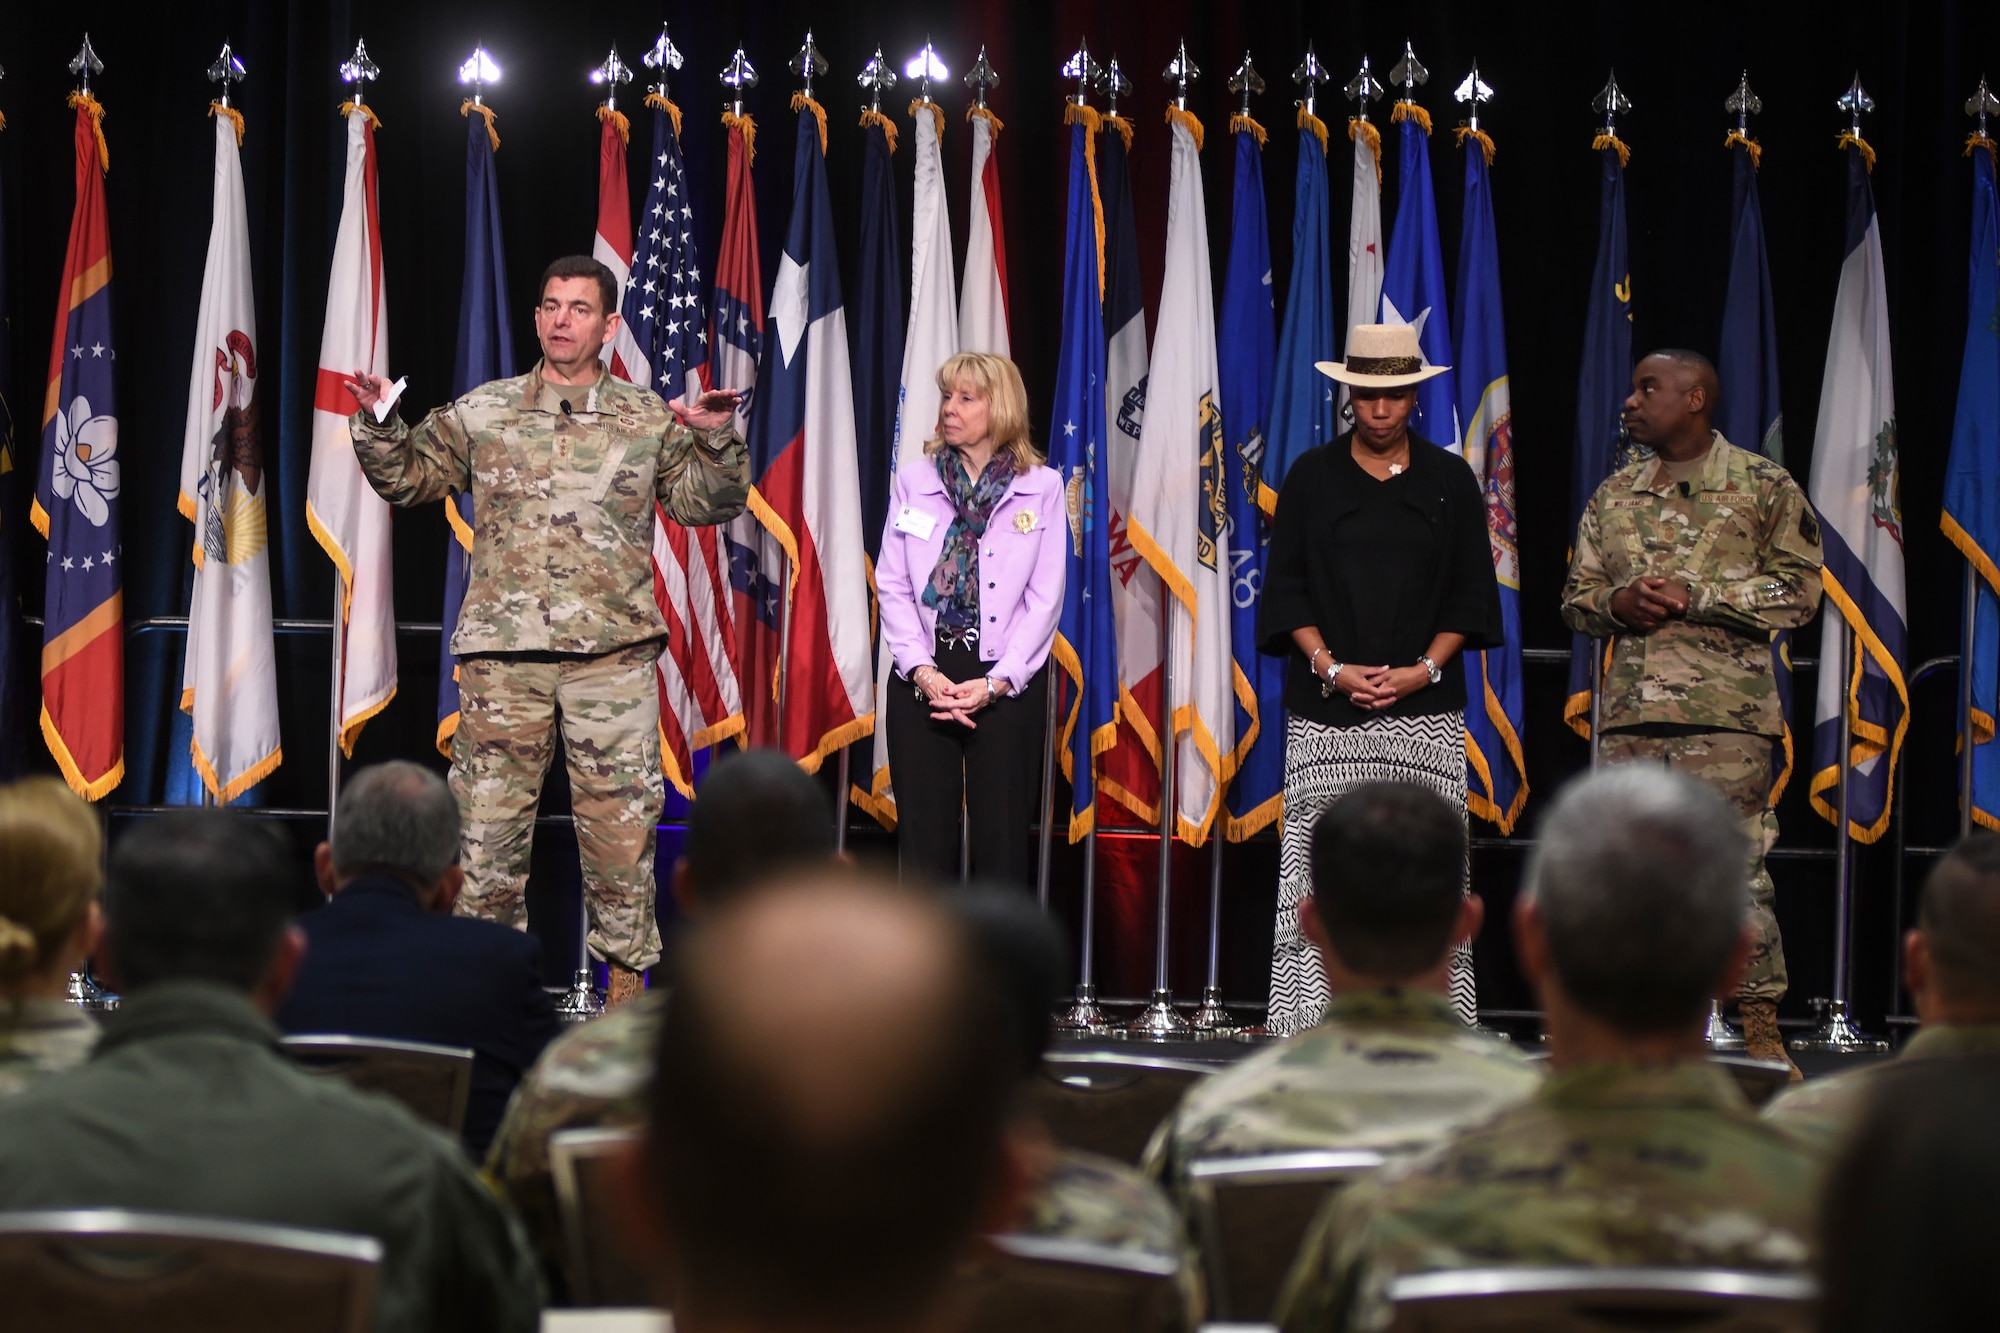 From left, U.S. Air Force Lt. Gen. Michael A. Loh, director, Air National Guard (ANG), Mrs. Dianne Loh, Mrs. Gwendolyn Williams, and Command Chief Master Sgt. Maurice L. Williams, command chief, ANG, take part in the opening ceremony of the 2022 Air National Guard Senior Leader Conference (ASLC) in Dallas, Texas, April 19, 2022. ASLC joined together senior leaders and commanders from across the 90 wings, 50 states, 3 territories and the District of Columbia to exchange ideas and provide input on critical matters impacting the future of the ANG and Air Force. (U.S. Air National Guard photo by Tech. Sgt. Morgan R. Whitehouse)